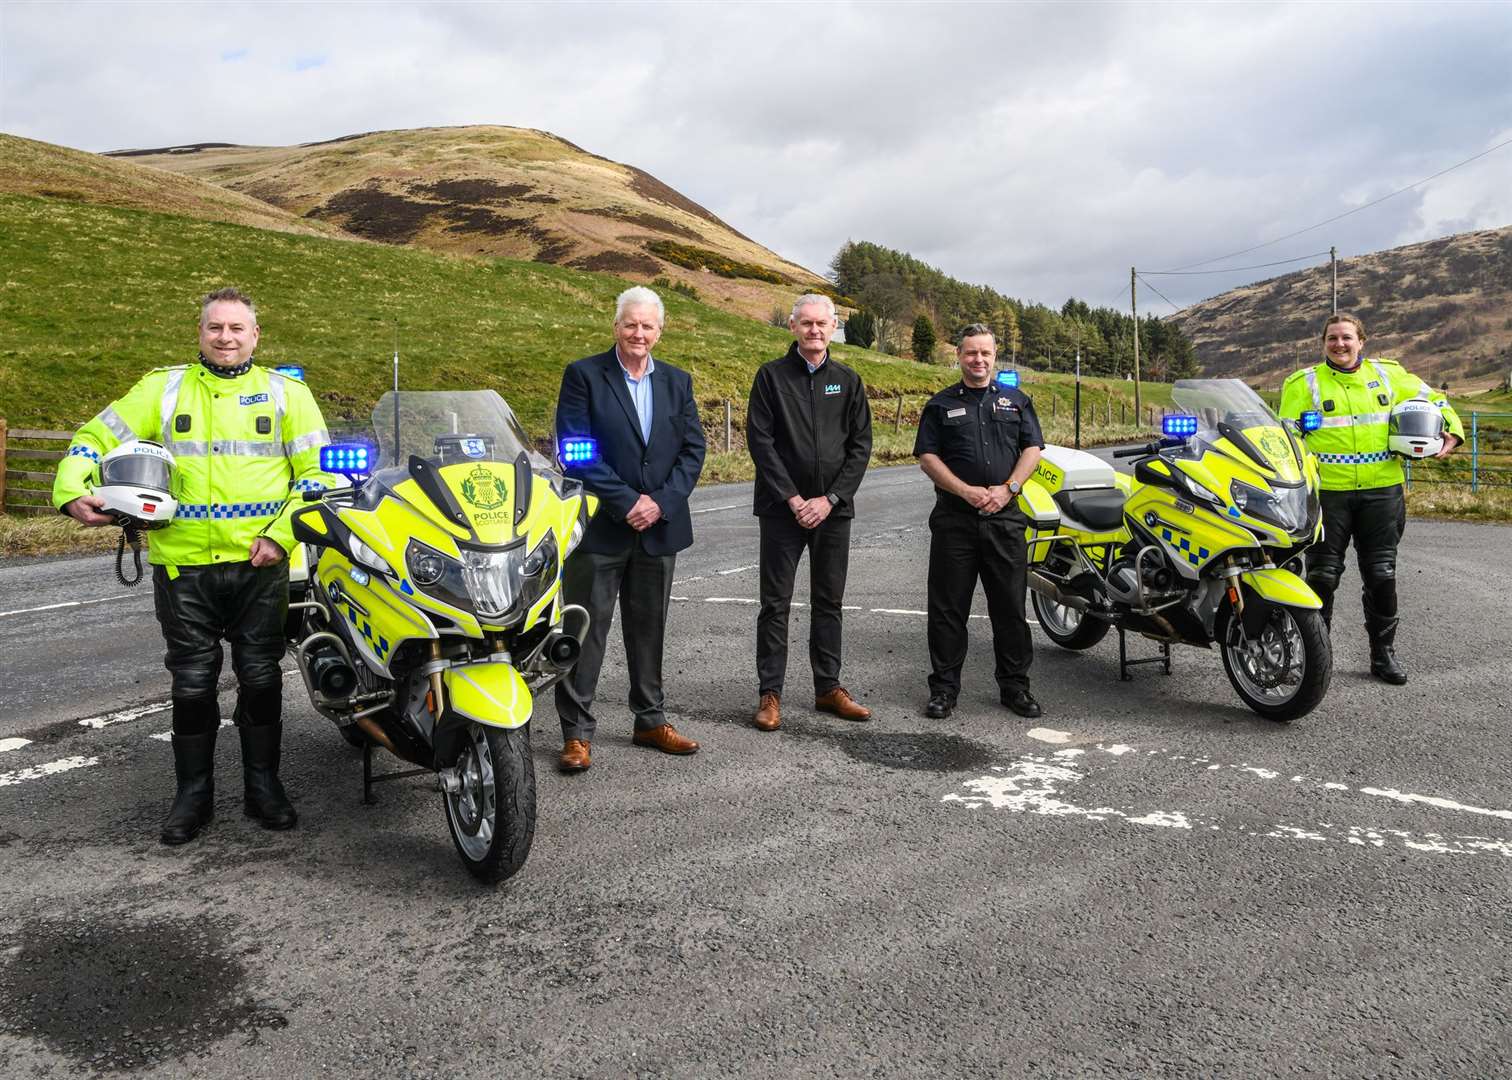 Inspector Greg Burns, Michael McDonnell (Road Safety Scotland), Neil Greig (Institute of Advanced Motorists), Matthew McLay (Scottish Fire and Rescue), PC Nicola Ross Advanced Motorcycle Instructor (Scottish Police College).